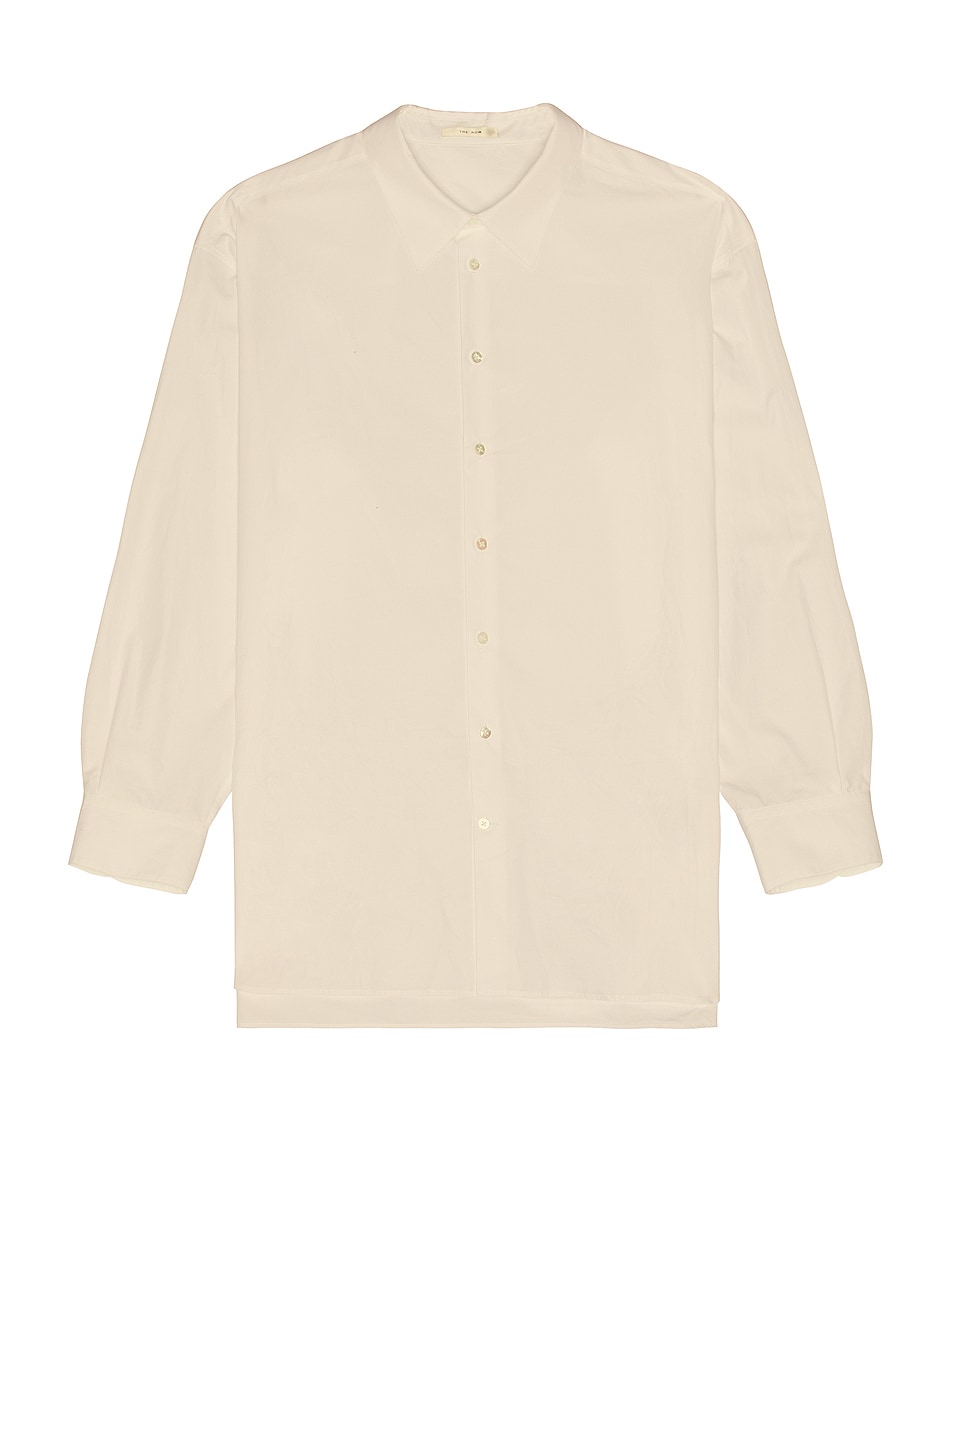 Image 1 of The Row Lukre Shirt in Parchment